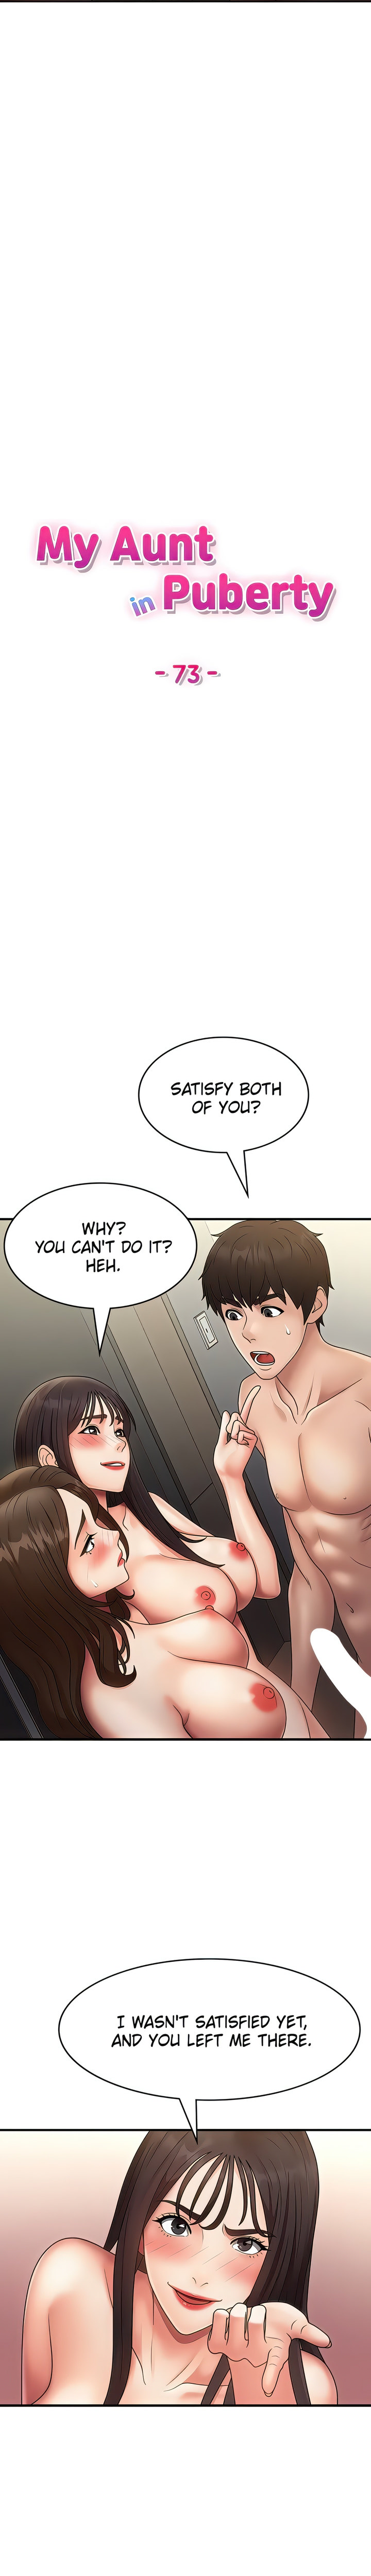 My Aunt in Puberty - Chapter 73 Page 2